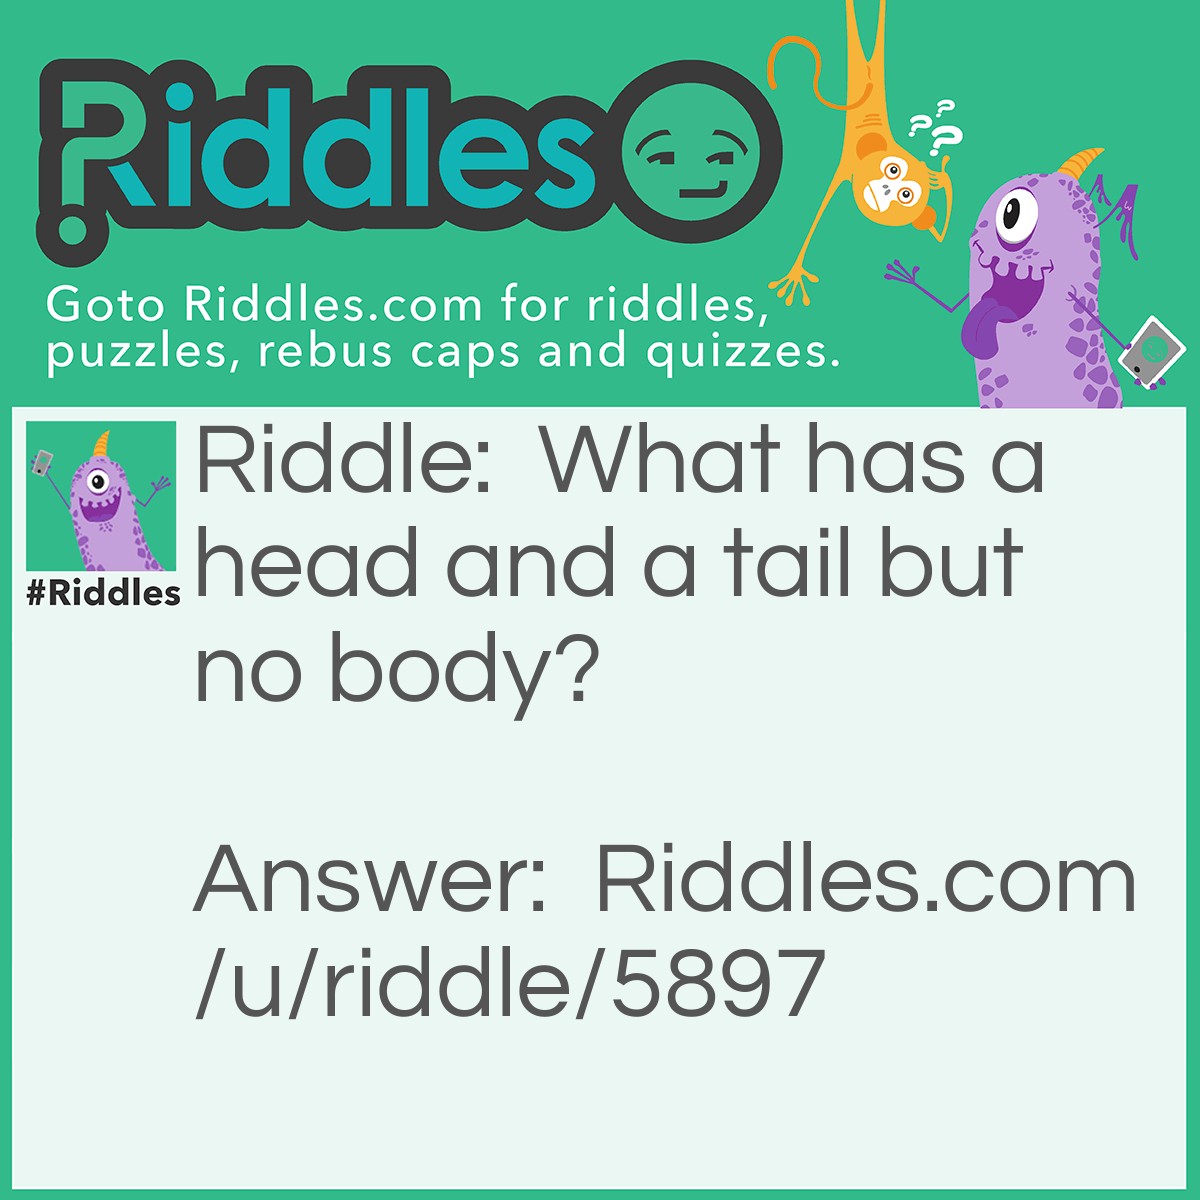 Riddle: What has a head and a tail but no body? Answer: A quarter.